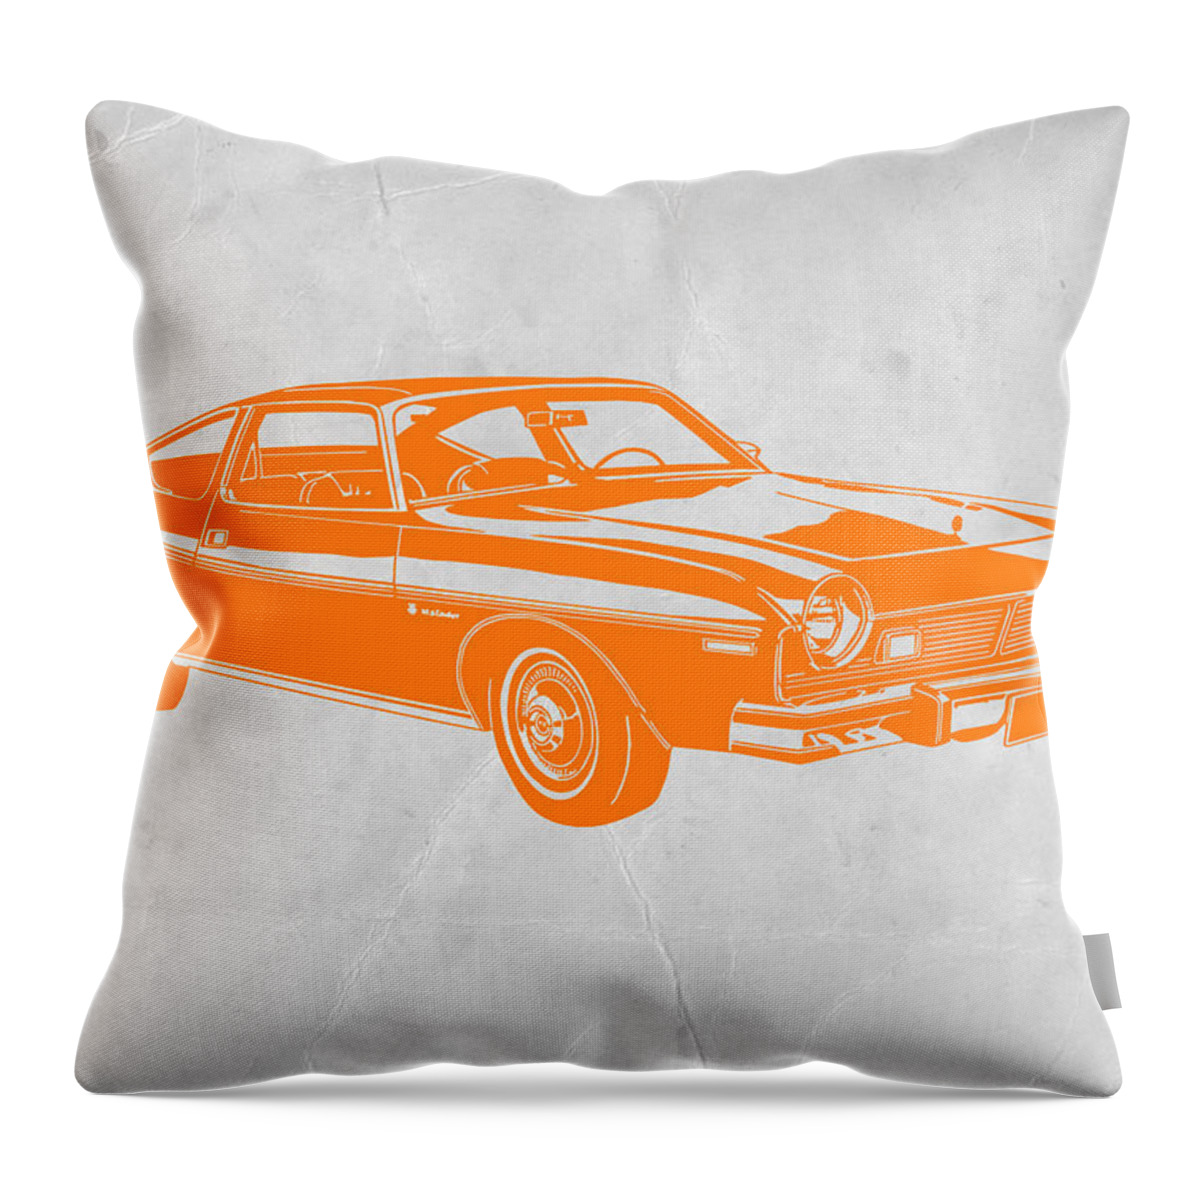 Muscle Car Throw Pillow featuring the photograph Muscle car by Naxart Studio